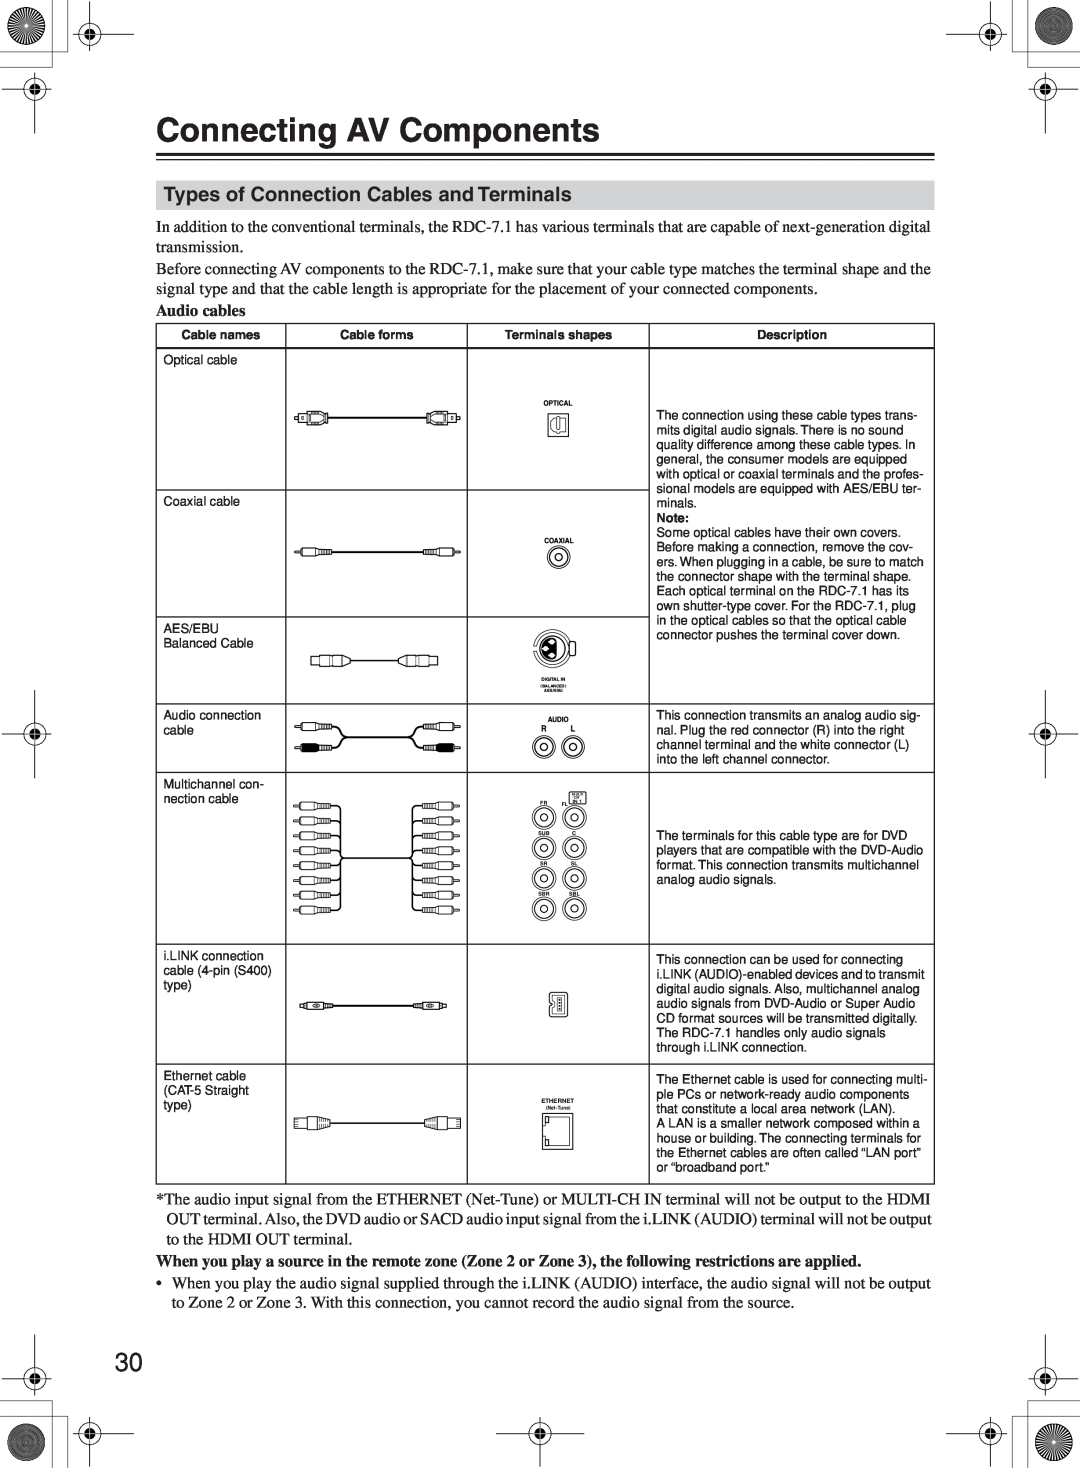 Integra RDC-7.1 instruction manual Connecting AV Components, Types of Connection Cables and Terminals, Audio cables 